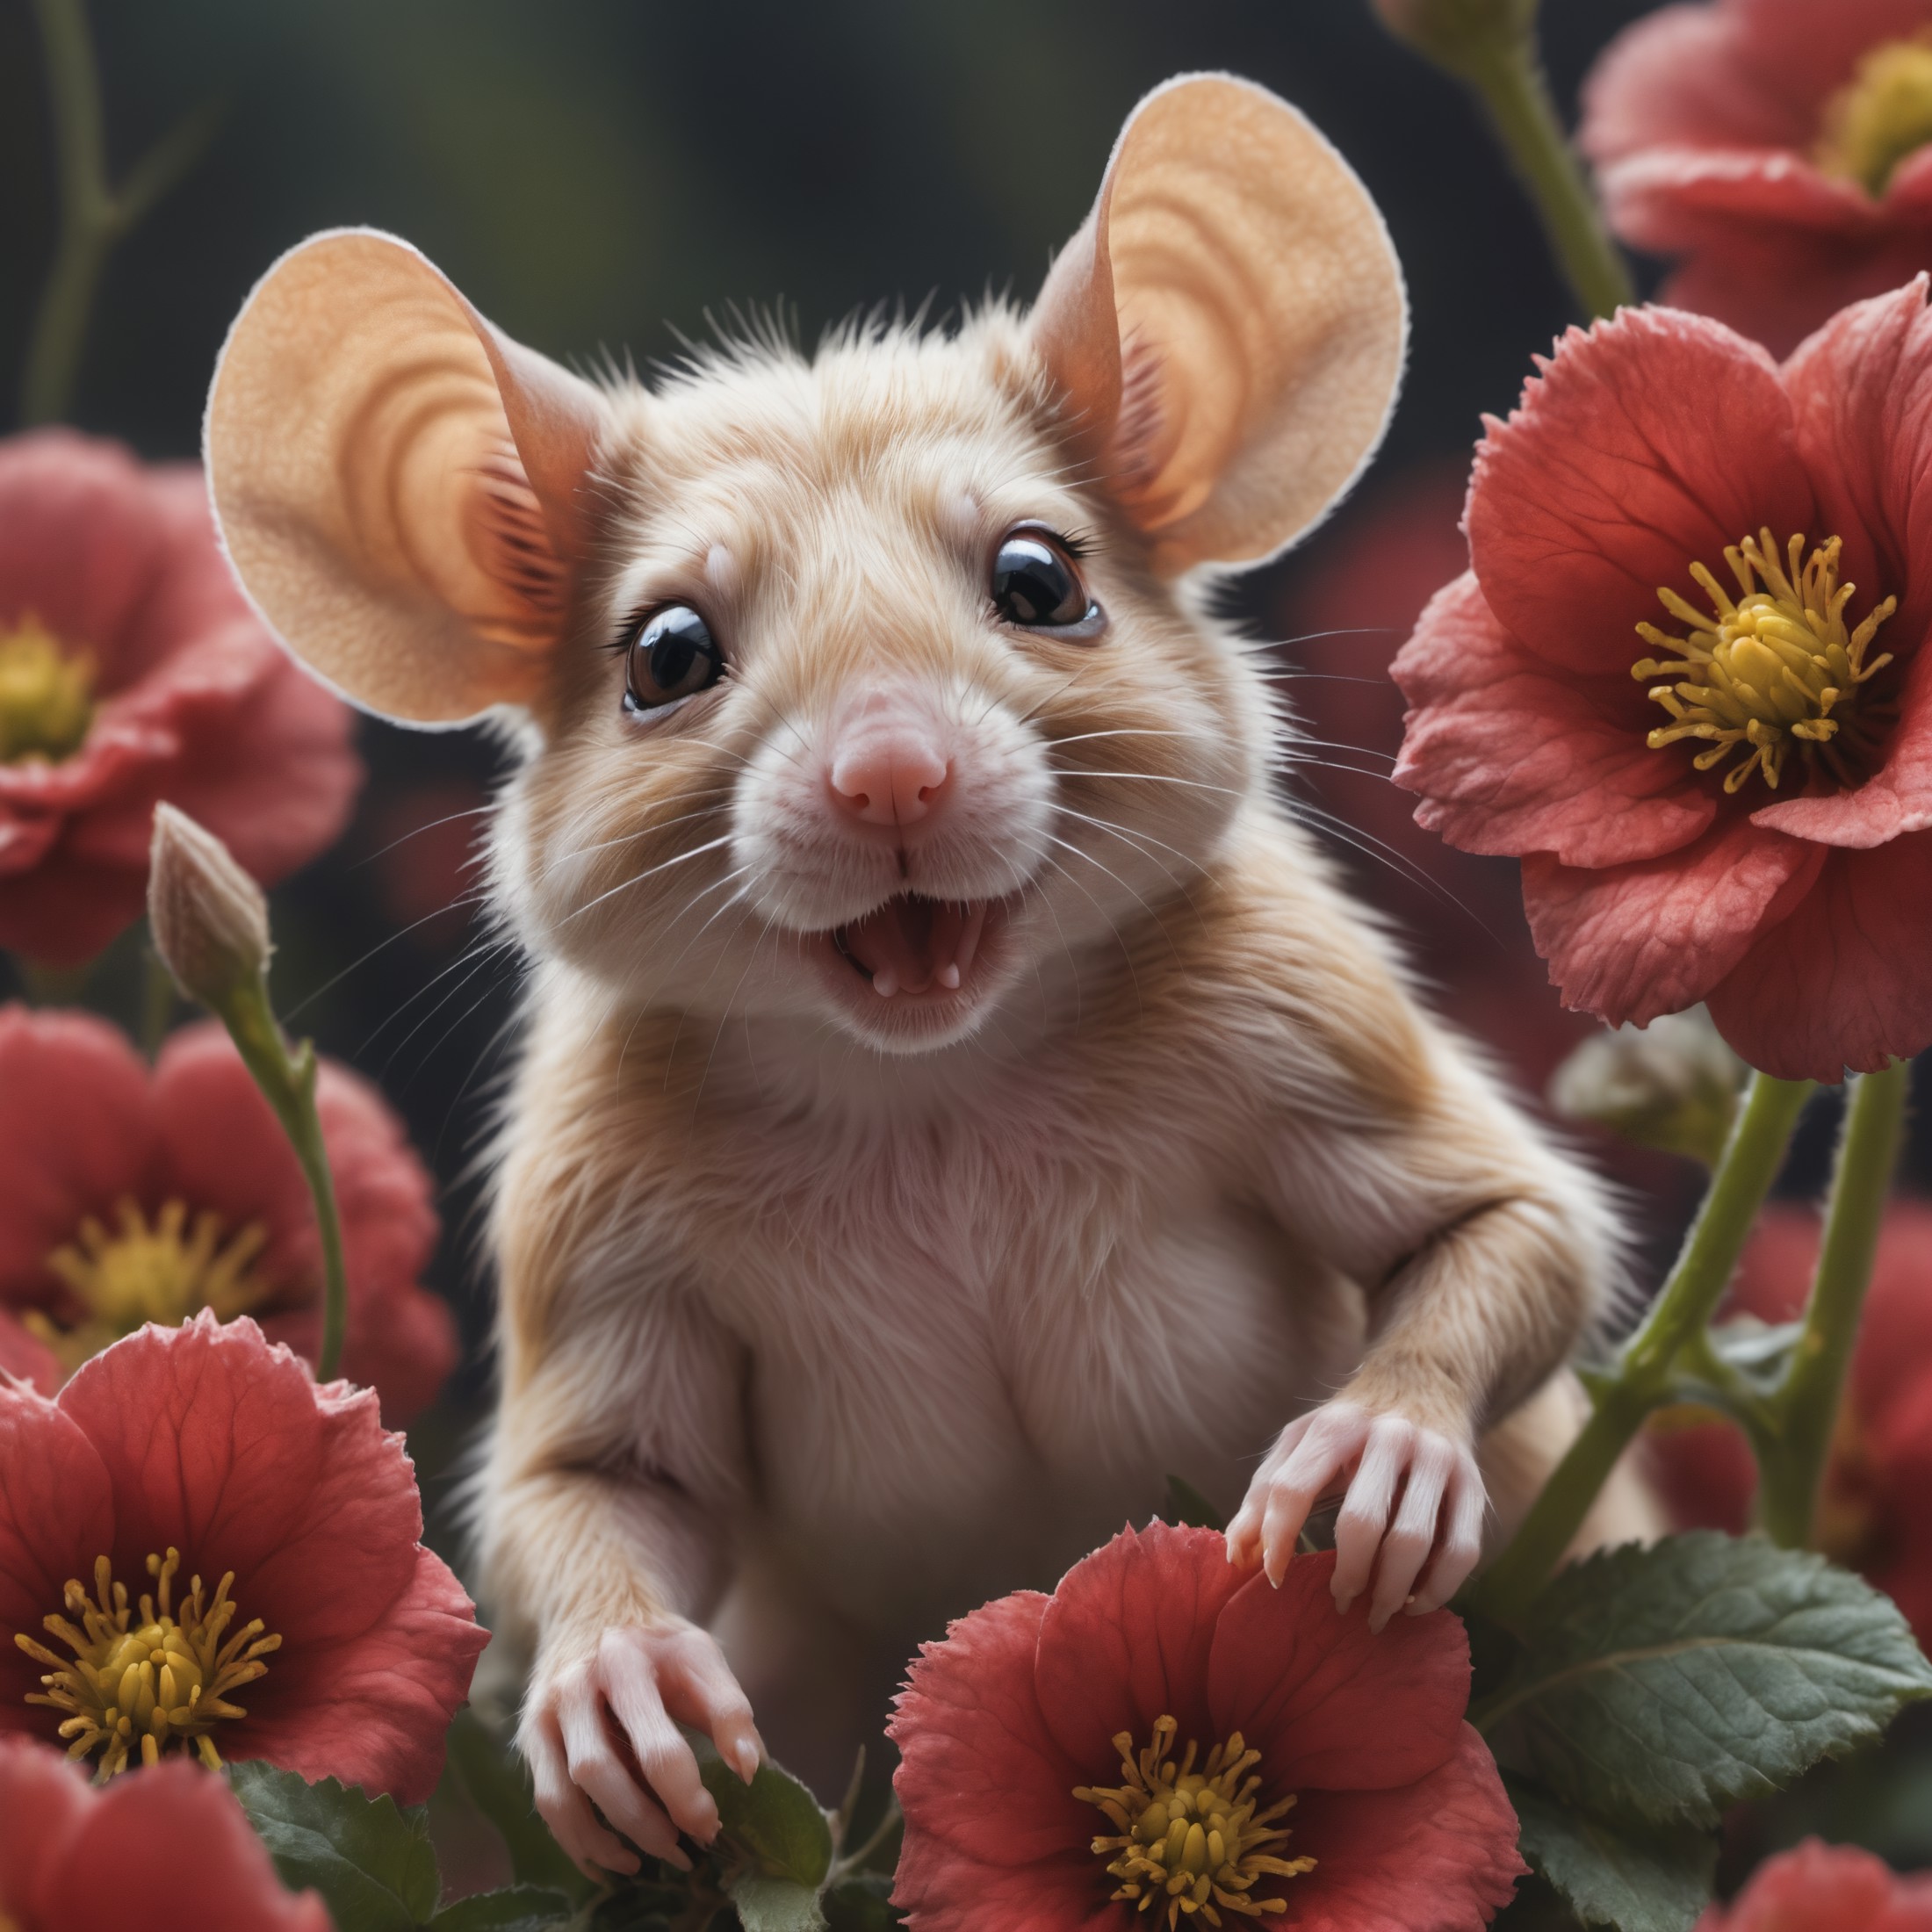 ais-flowery, a small rodent peeking out of a red flower, a microscopic photo by Wendy Froud, shutterstock contest winner, ...